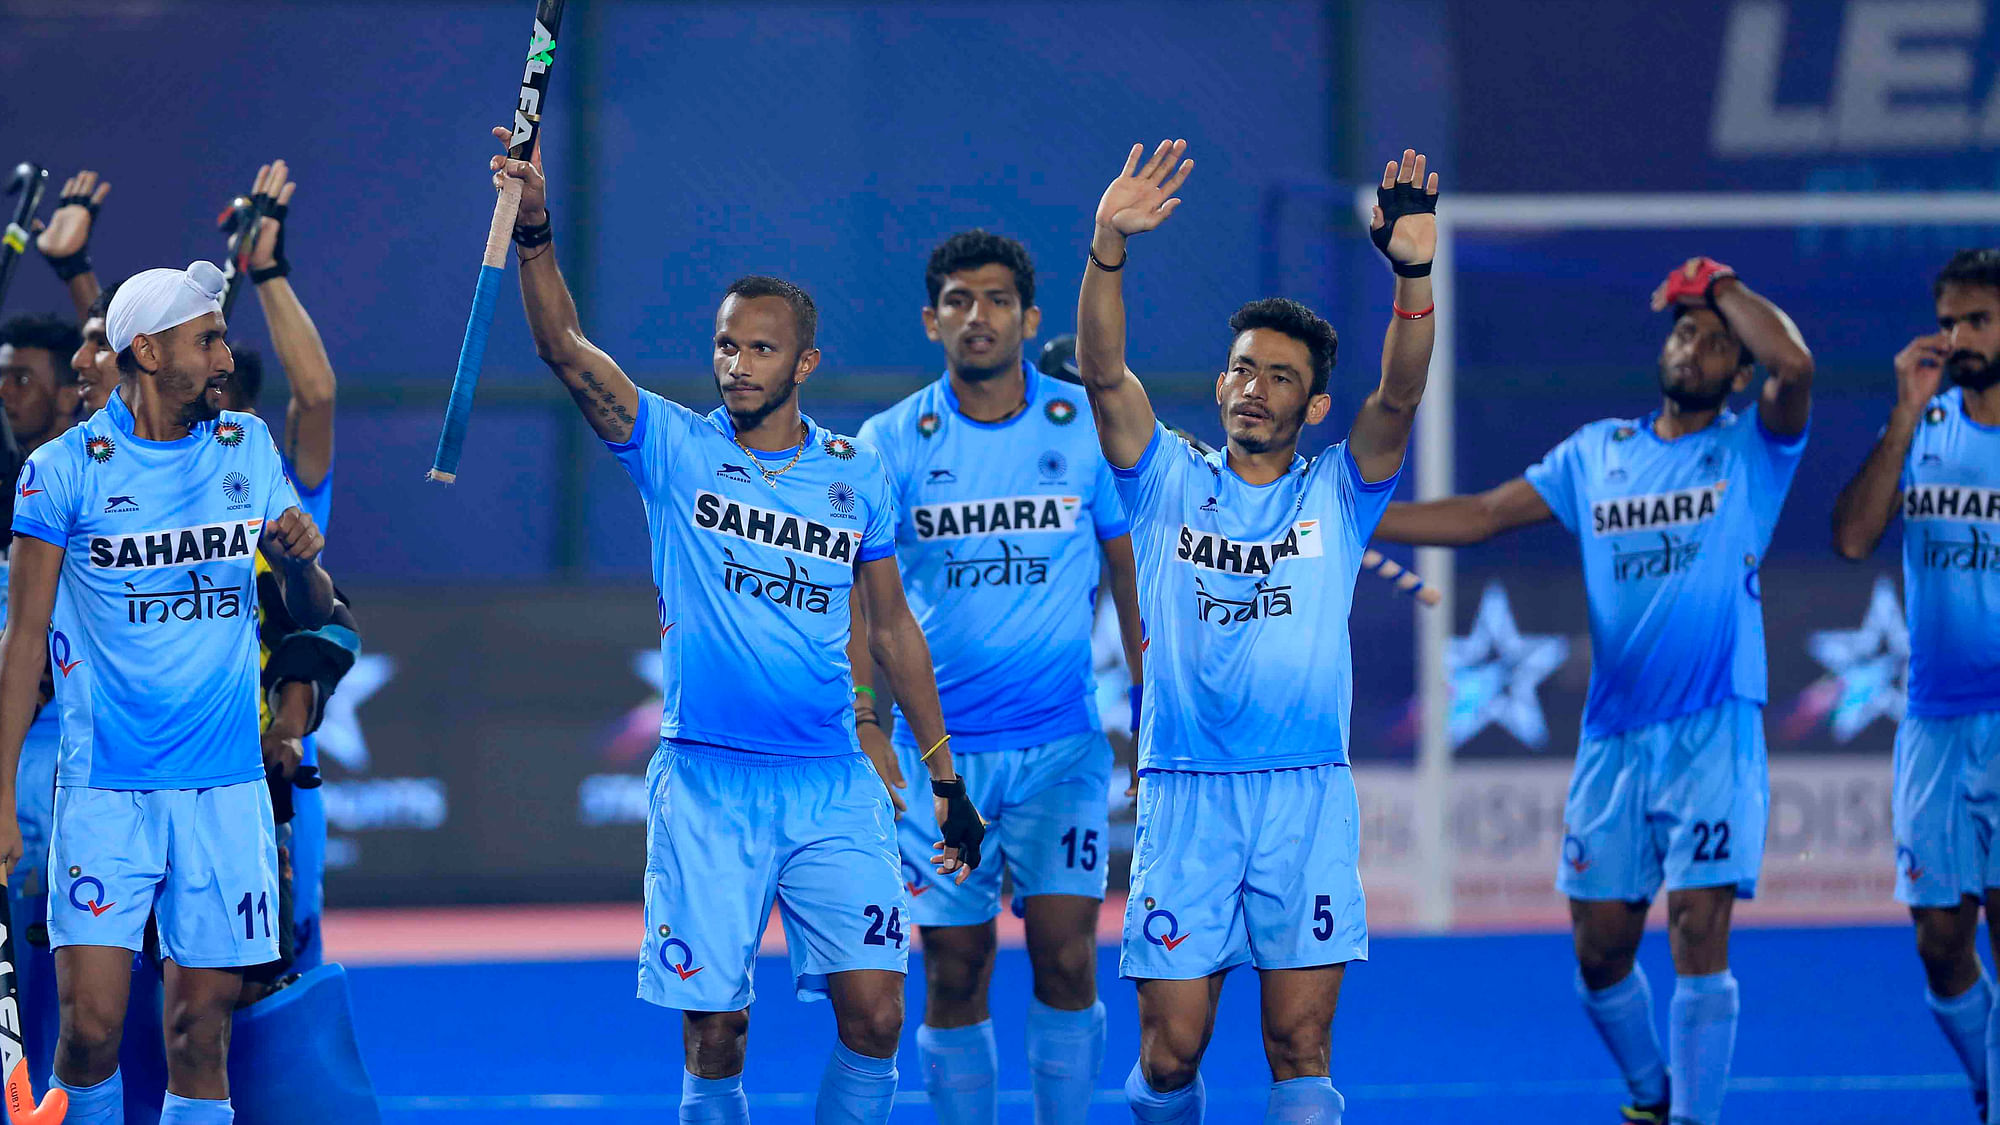 The Indian men’s hockey team will compete for the bronze on Saturday.